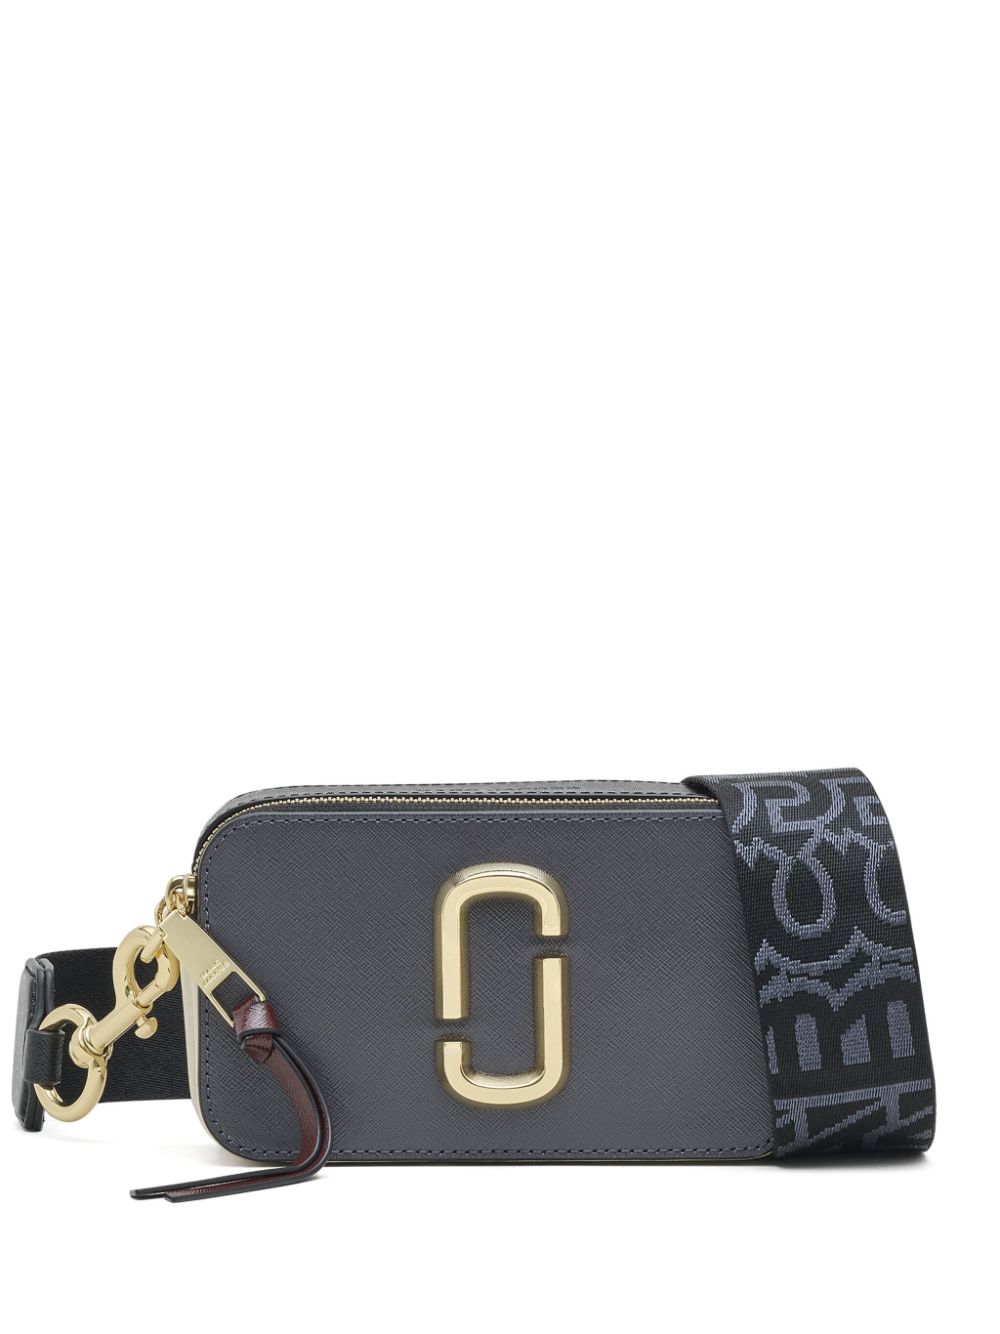 MIXED COLOURS MARC JACOBS 'THE SNAPSHOT' CAMERA BAG (2S3HCR500H03)